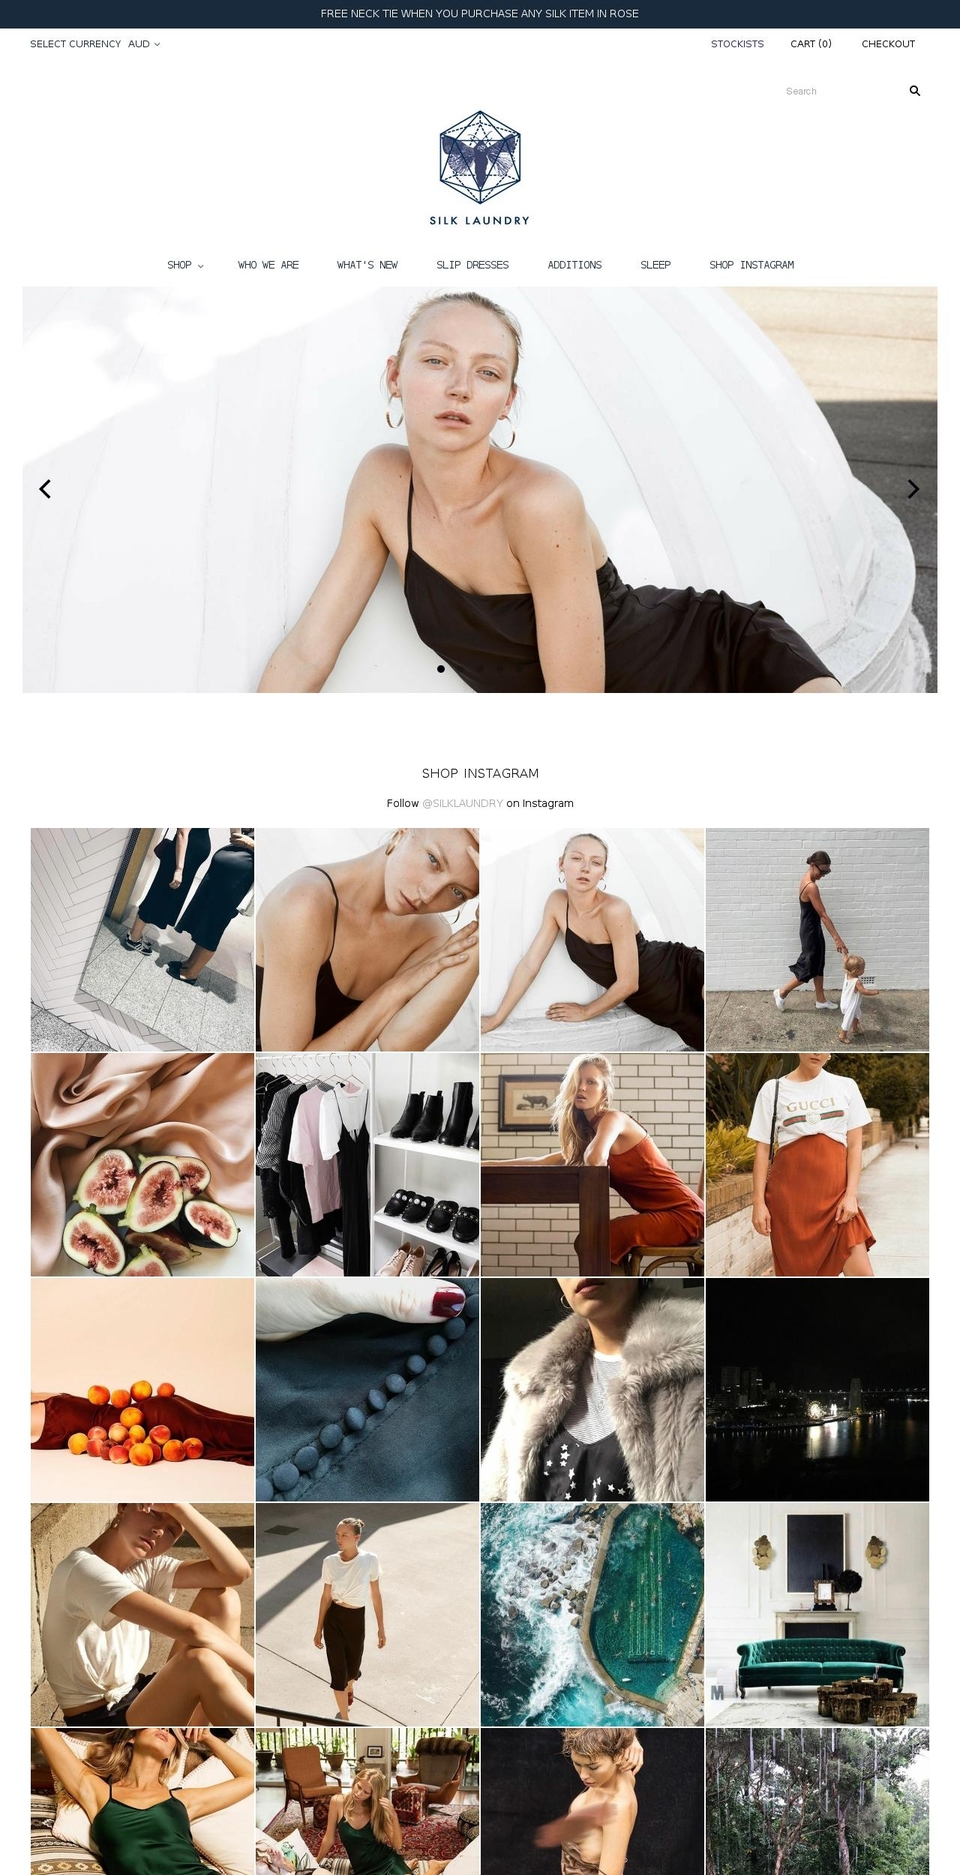 Copy of New Grid Shopify theme site example silklaundry.com